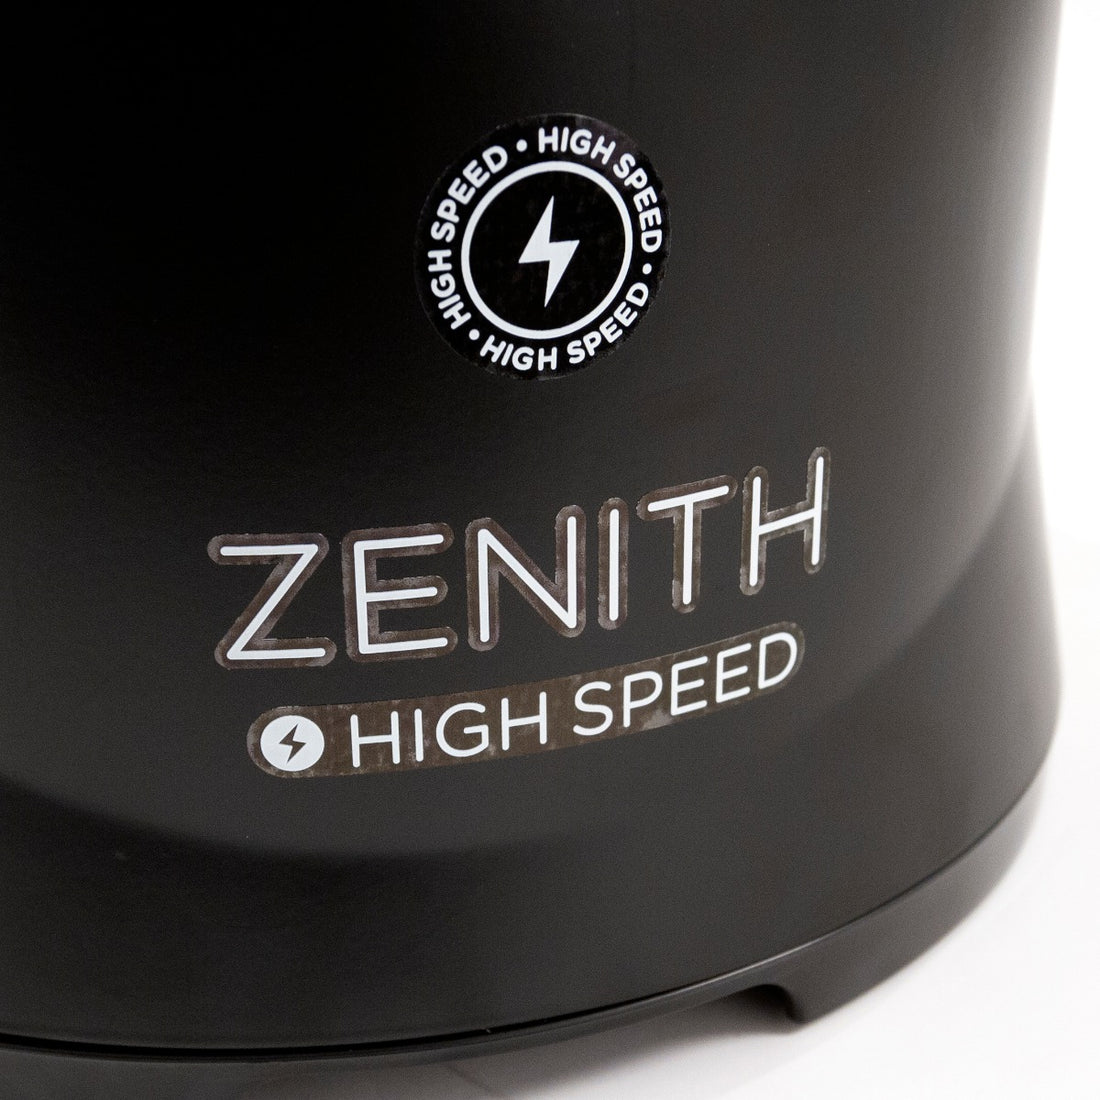 "ZENITH HIGH SPEED" logo on the base